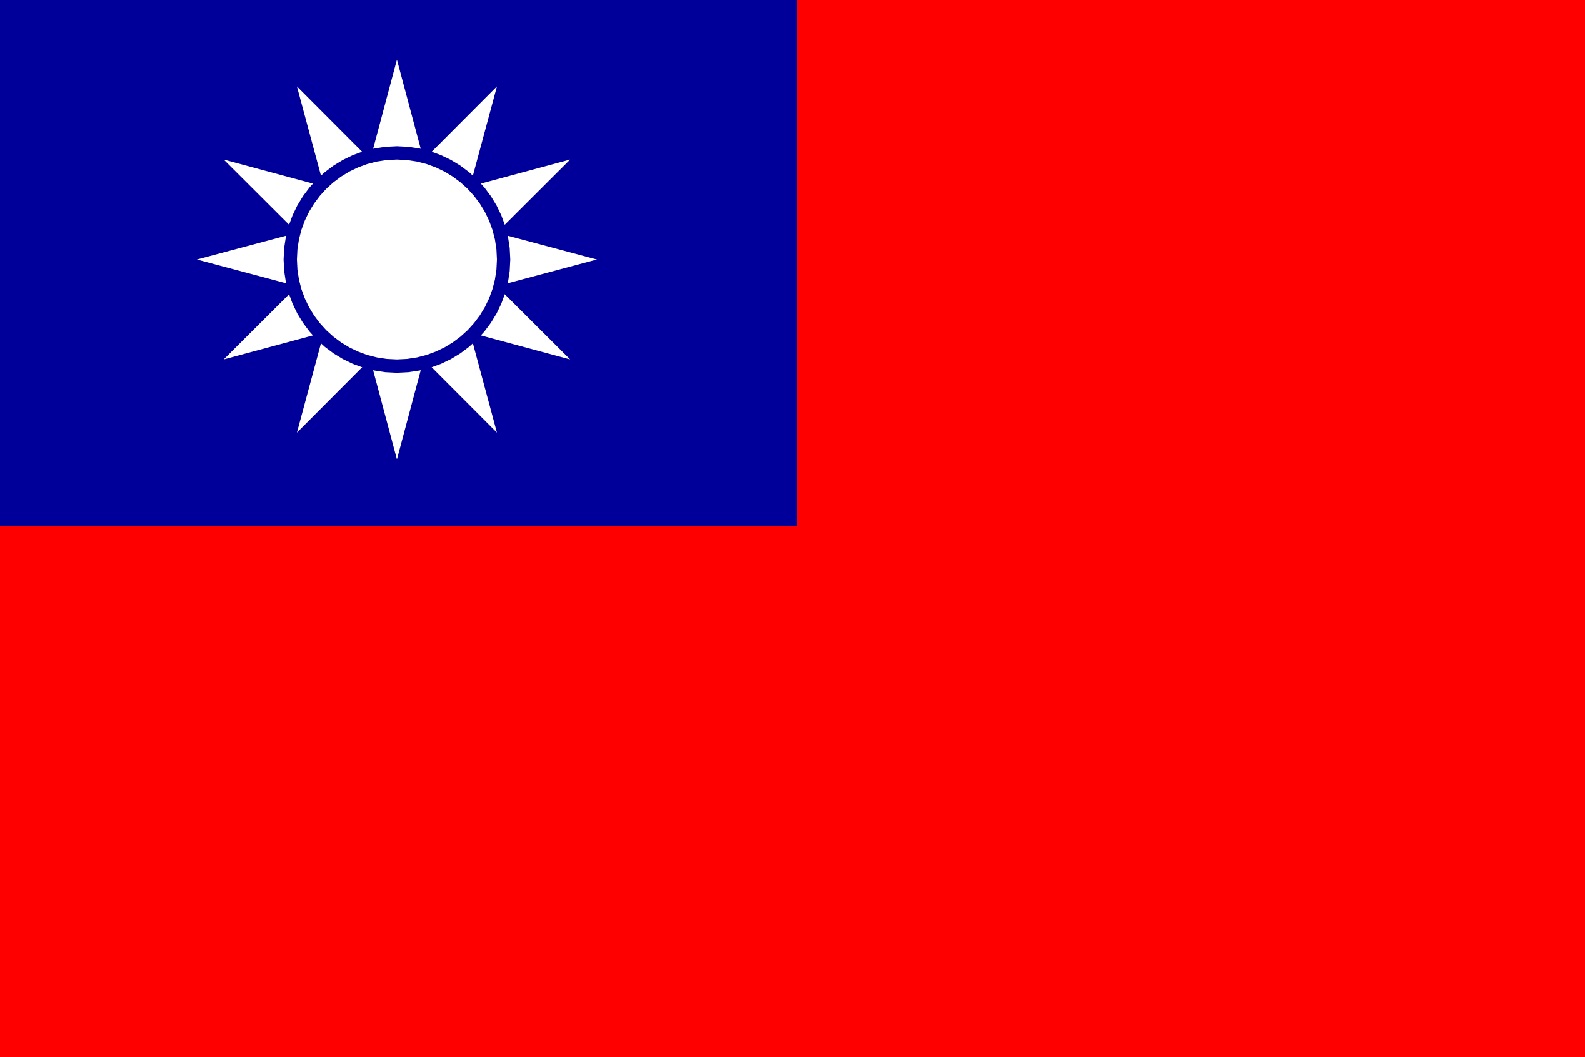 Image: Good call, Trump: It’s time America recognized Taiwan as a sovereign nation (and rejected the bullying of communist China)